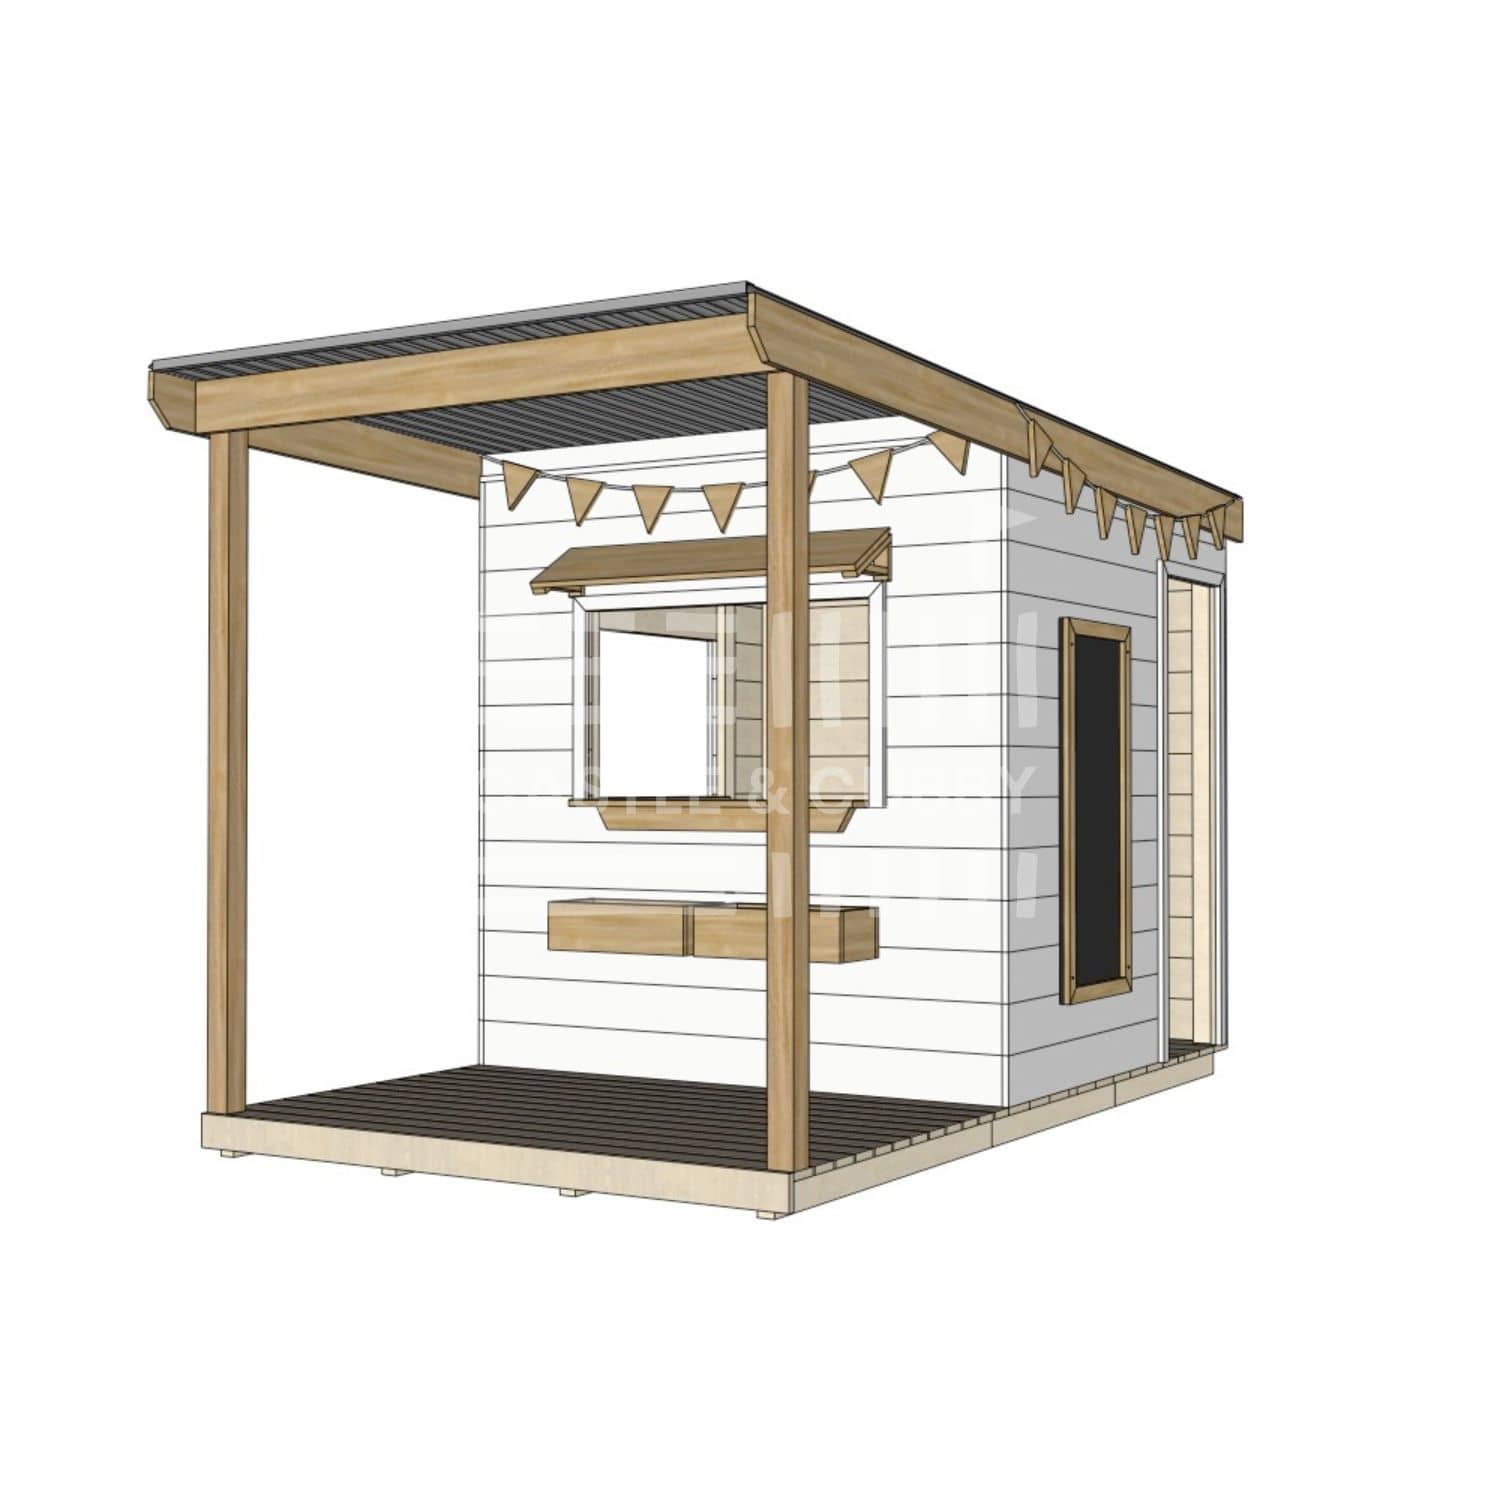 A commercial grade extended height painted pine midi square cubby house with front verandah and accessories package